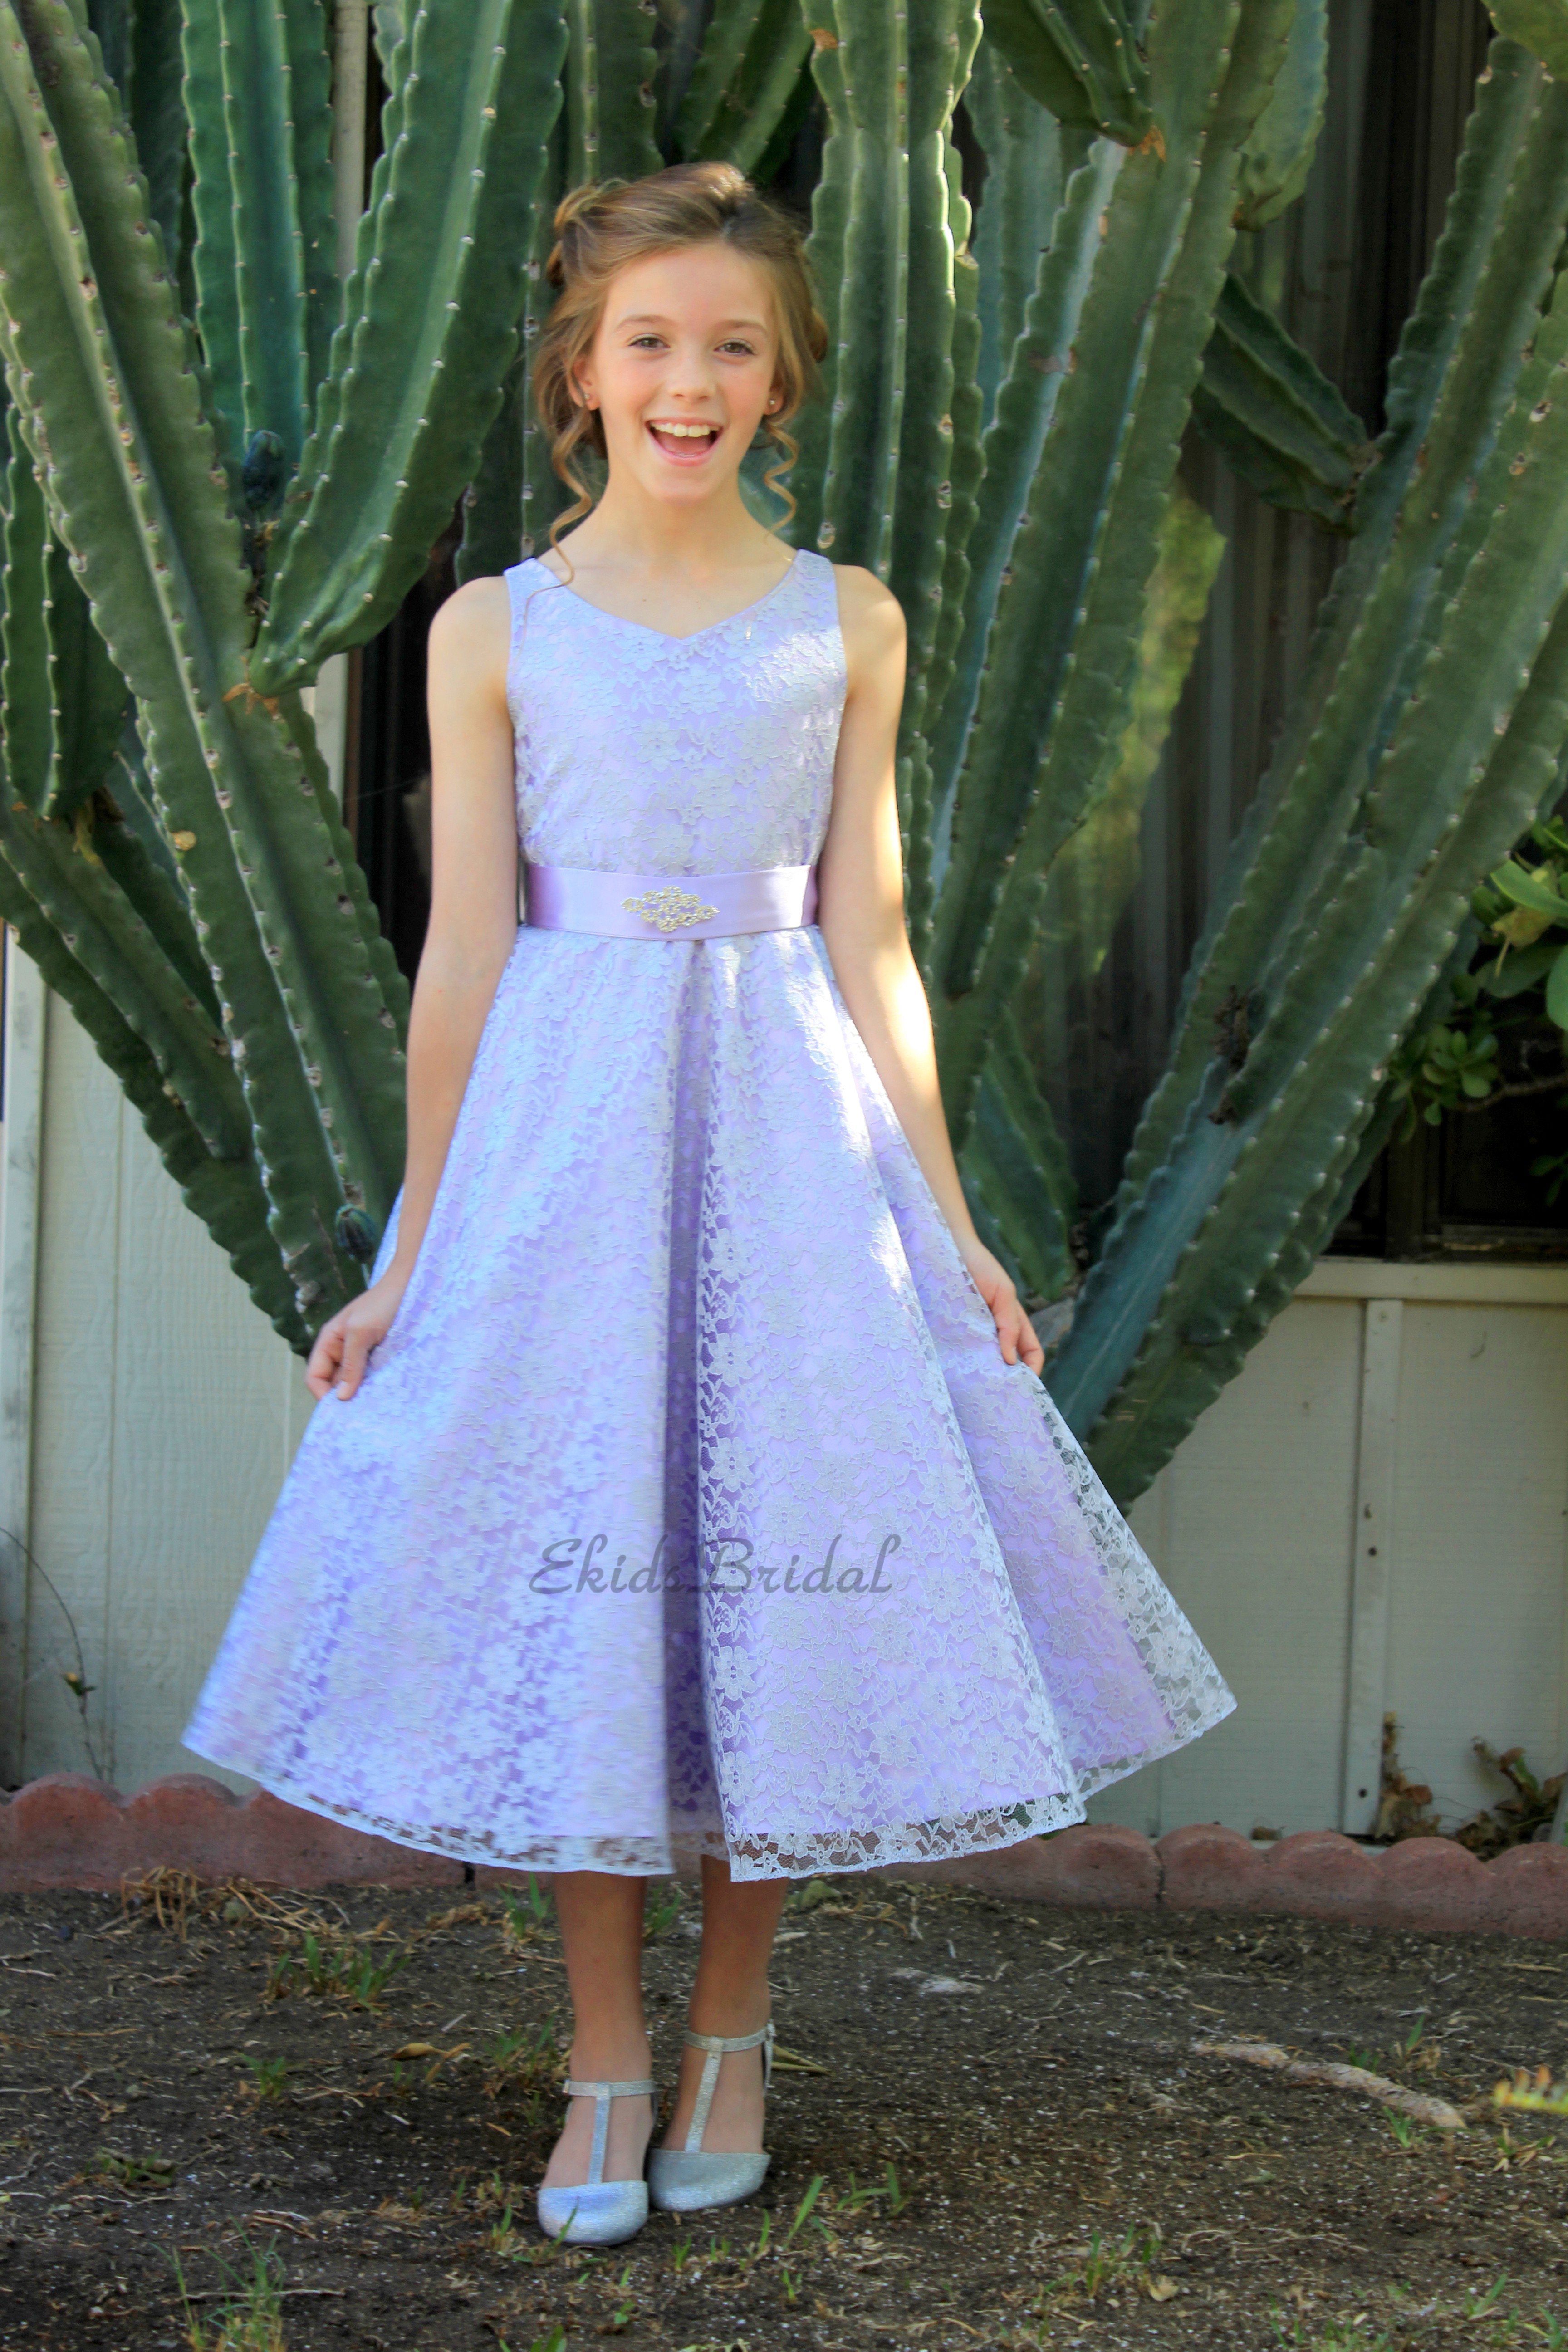 Silver/Lilac Floral Lace Overlay V-Neck Rhinestone Flower Girl Dress 166S